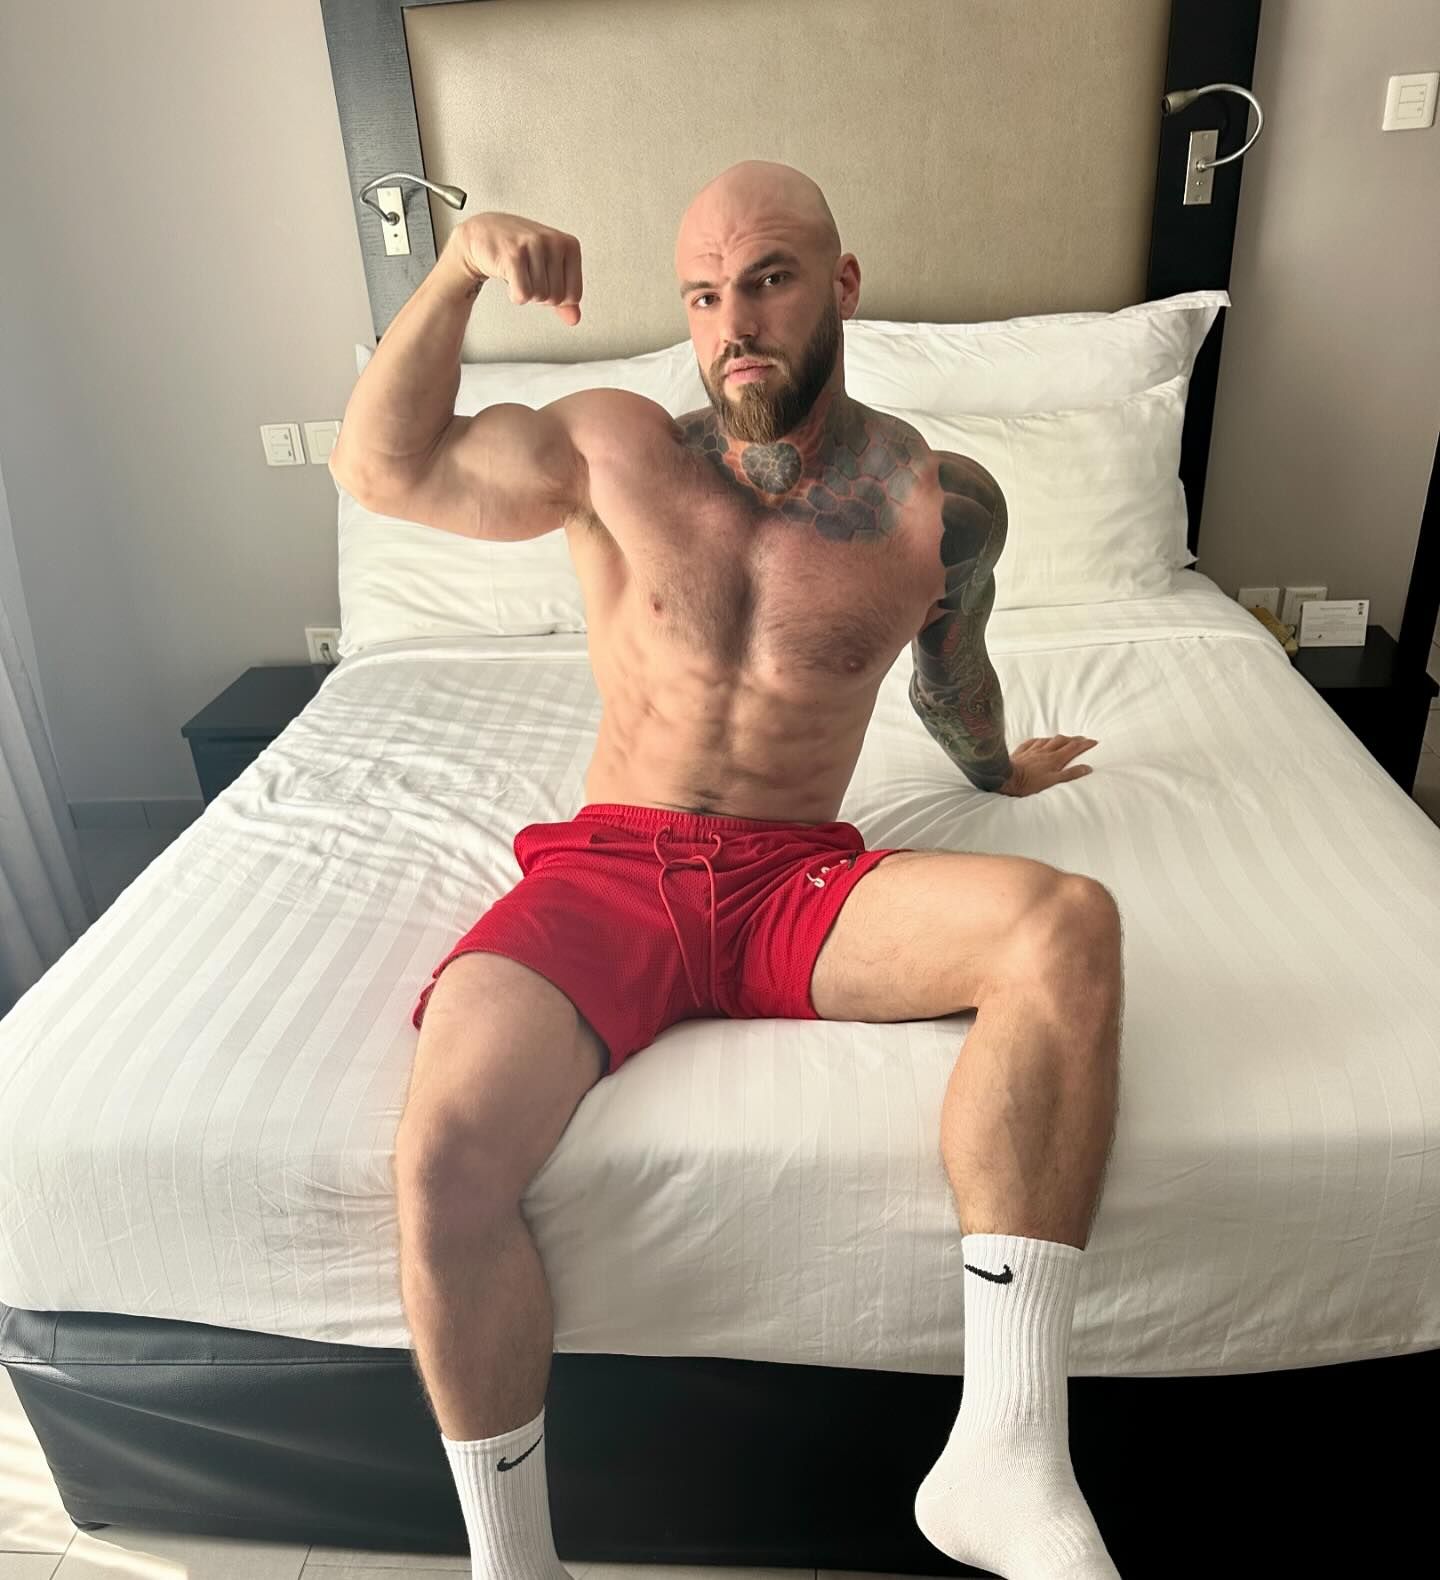 💪🏻 Daddy here. Do you like white socks?

#hunk #daddy #male #biceps #abs #fitguy #muscletop #handsome #guapo #aesthetic #athletics #6pack #hairychest #bodybuilder #masculinity #masculino #baldhunk #whitesocks #nike